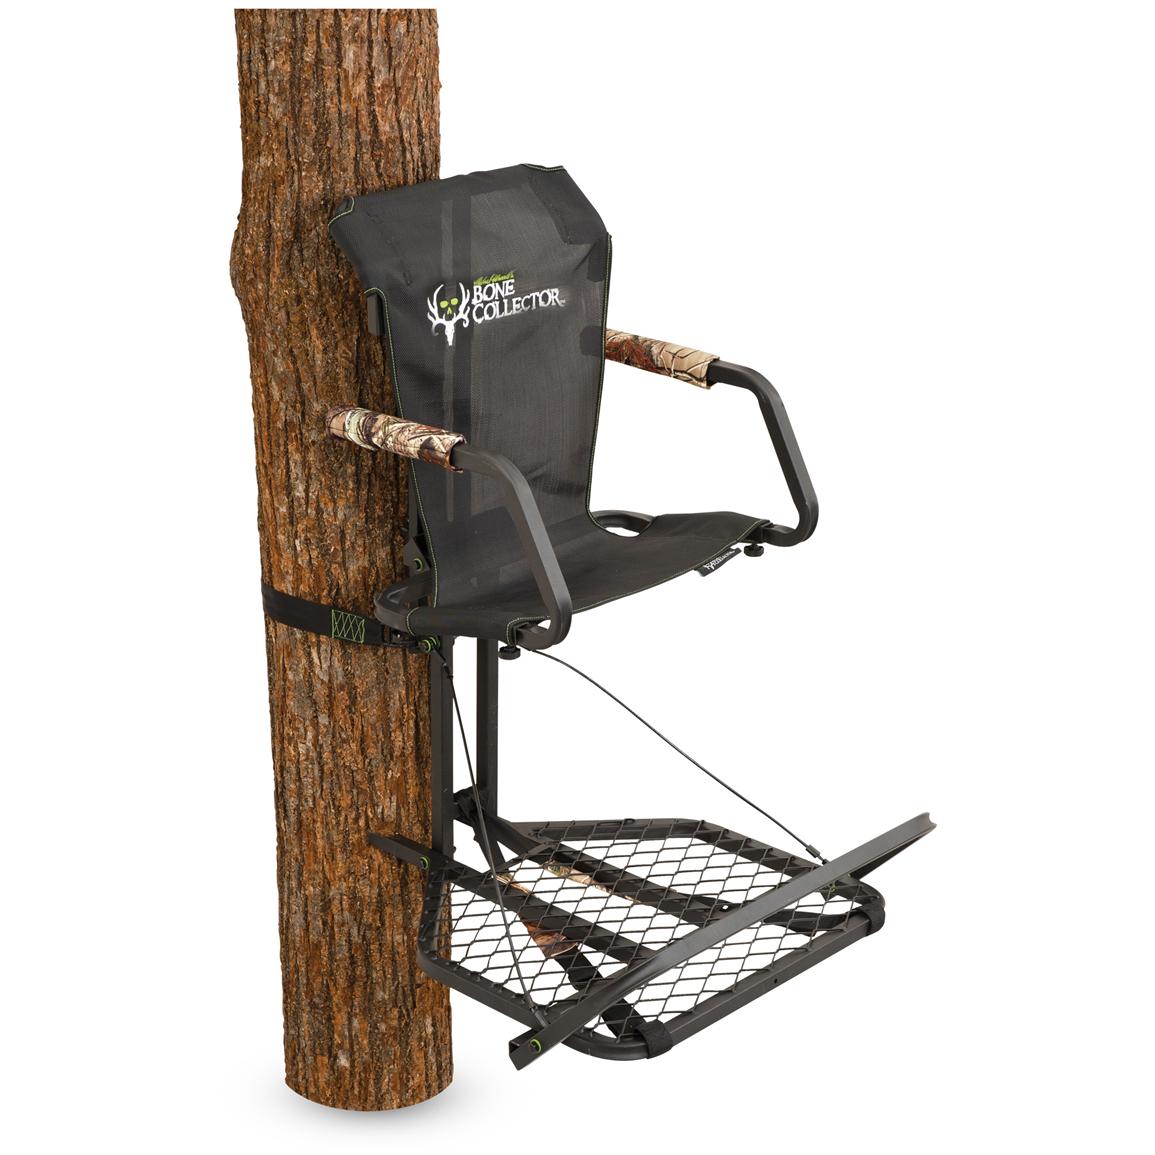 Ameristep Bone Collector Hang On Tree Stand Realtree All